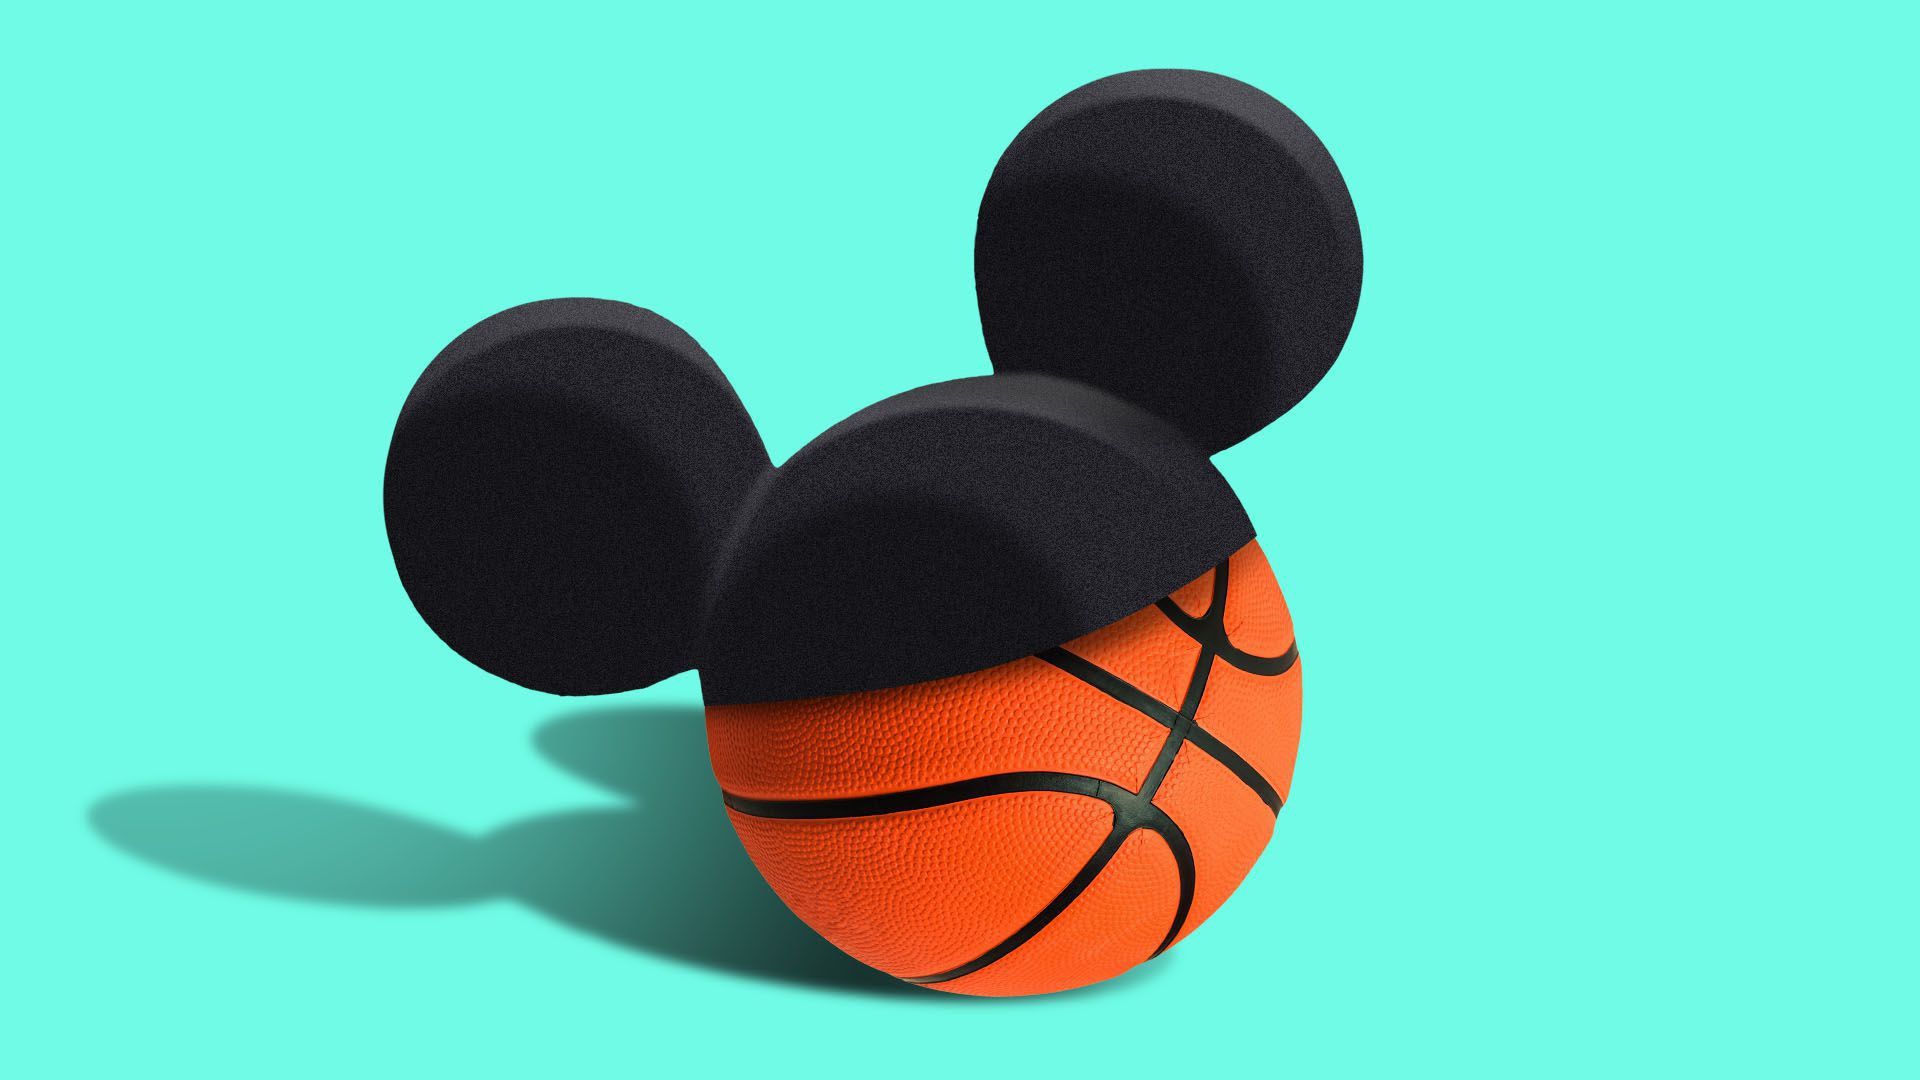 Illustration of a basketball wearing a Mickey Mouse hat